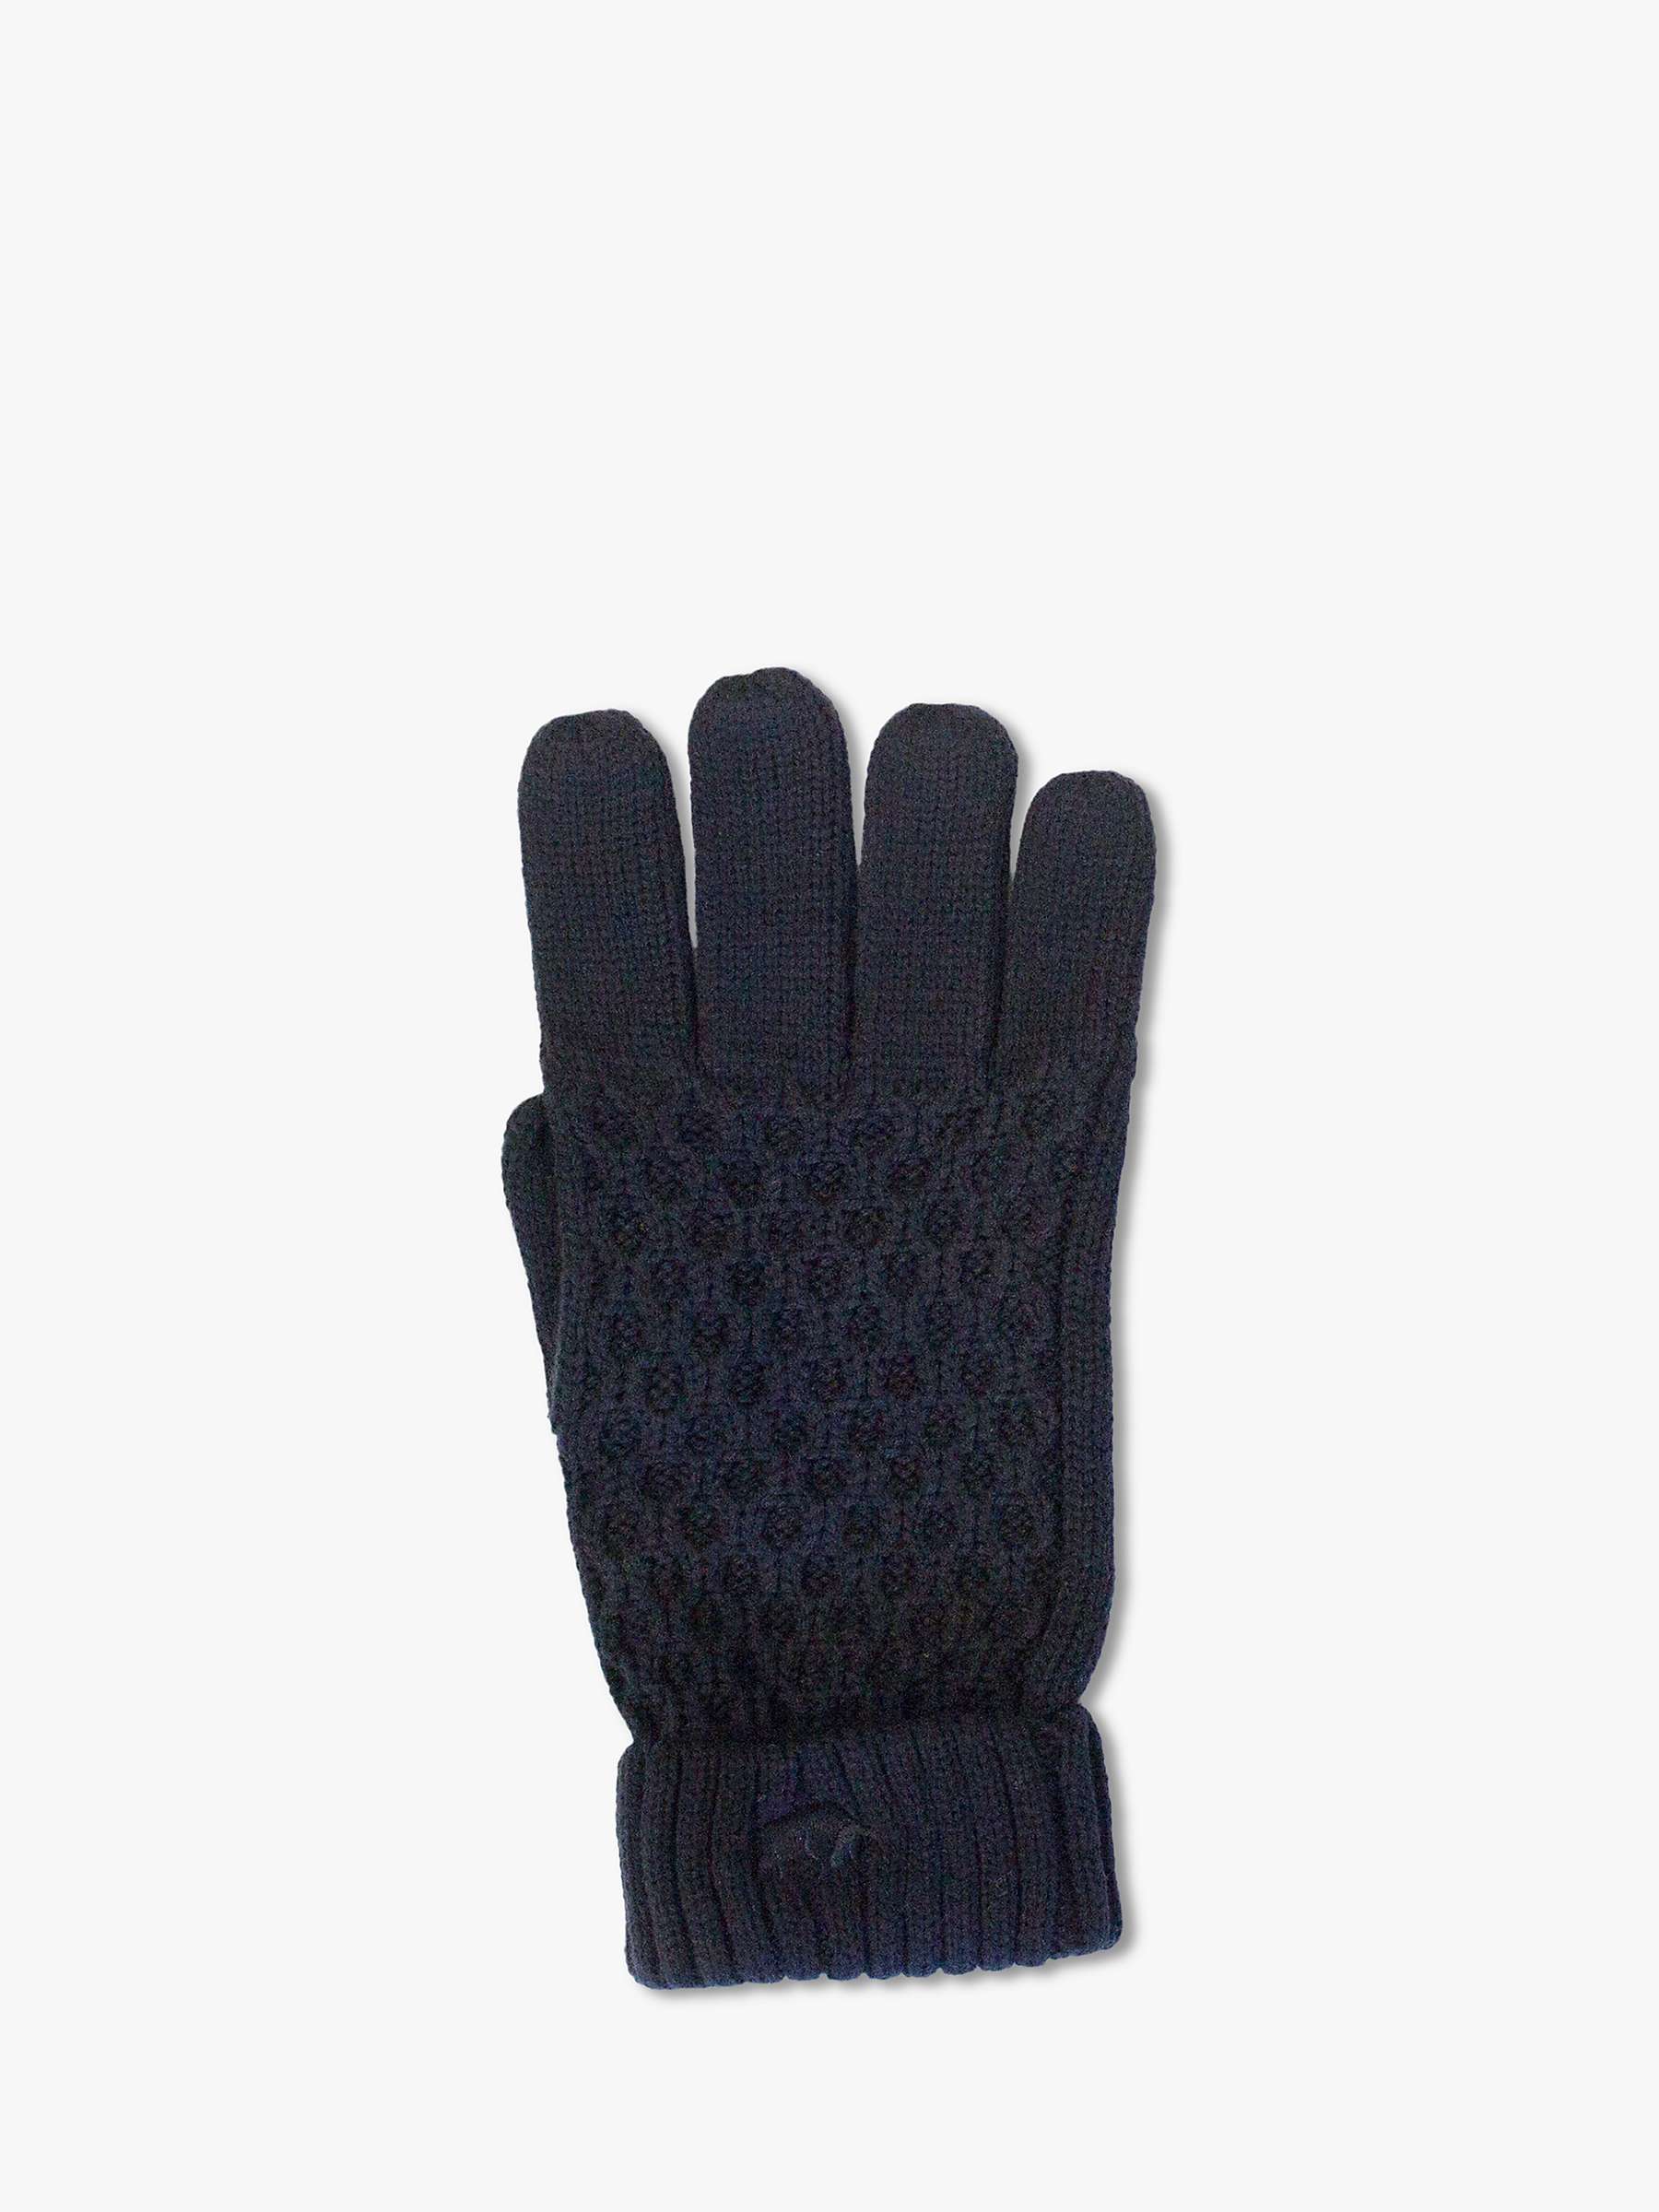 Buy Raging Bull Cable Knit Gloves Online at johnlewis.com